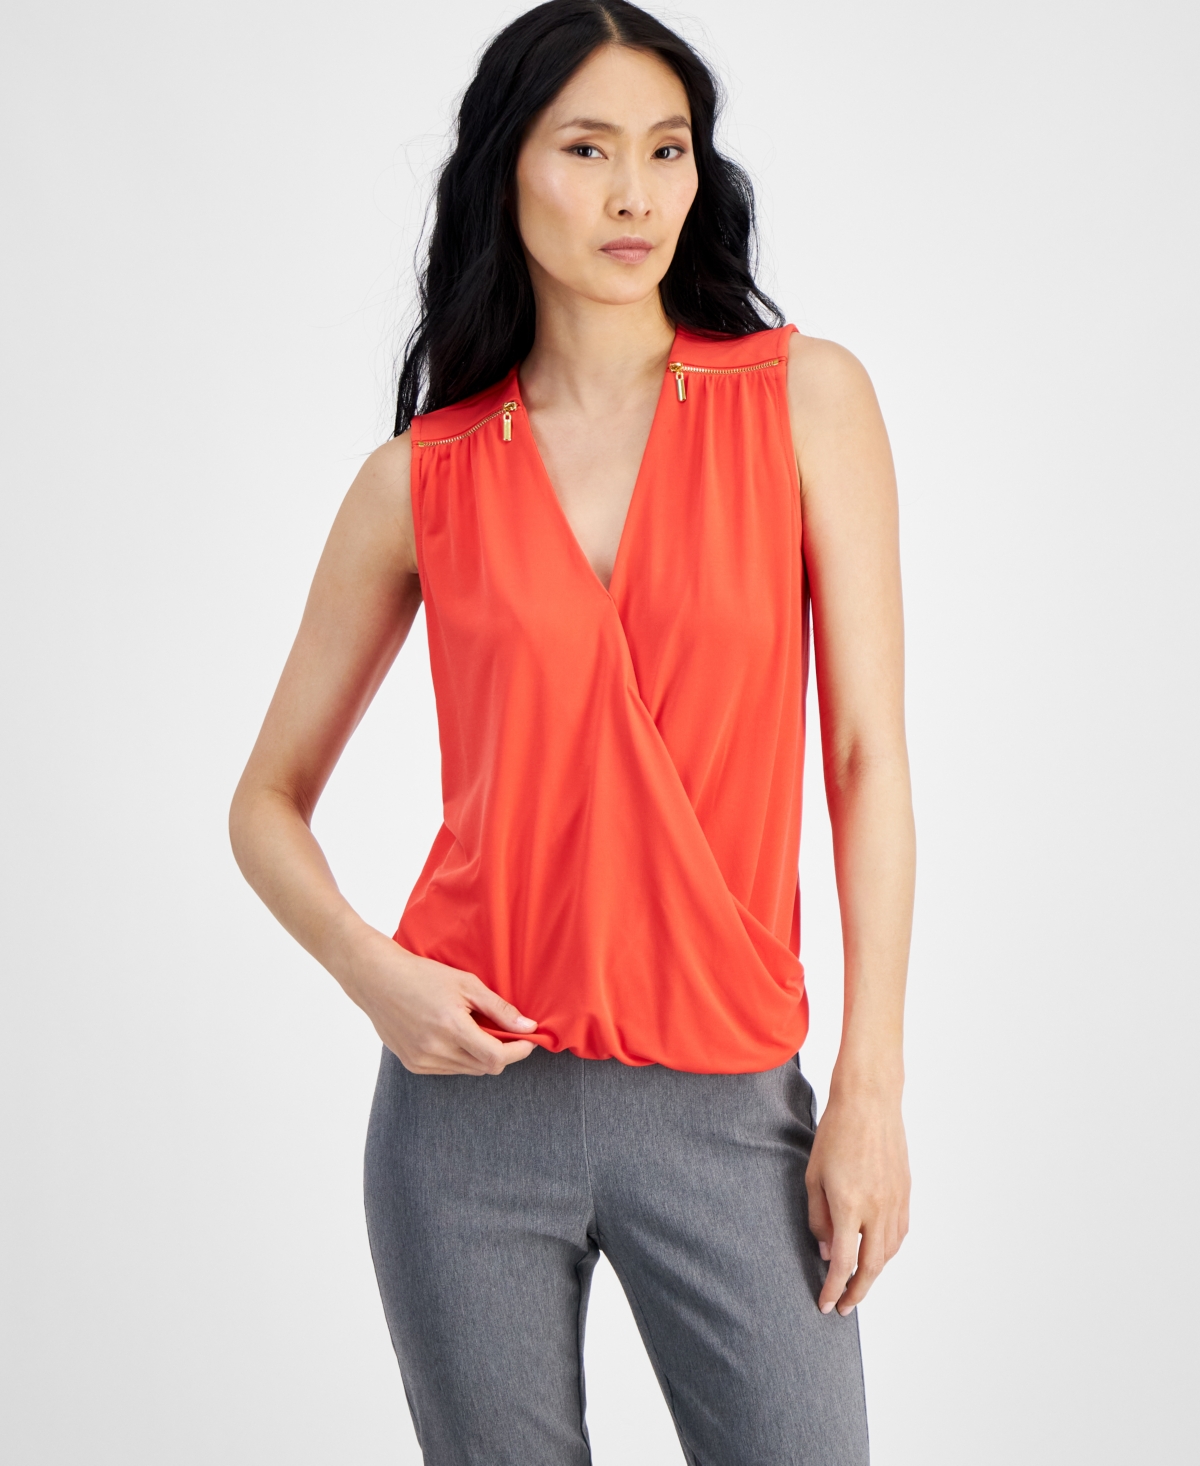 Women's Sleeveless Zip-Shoulder Surplice Blouse, Created for Macy's - Tropical Punch